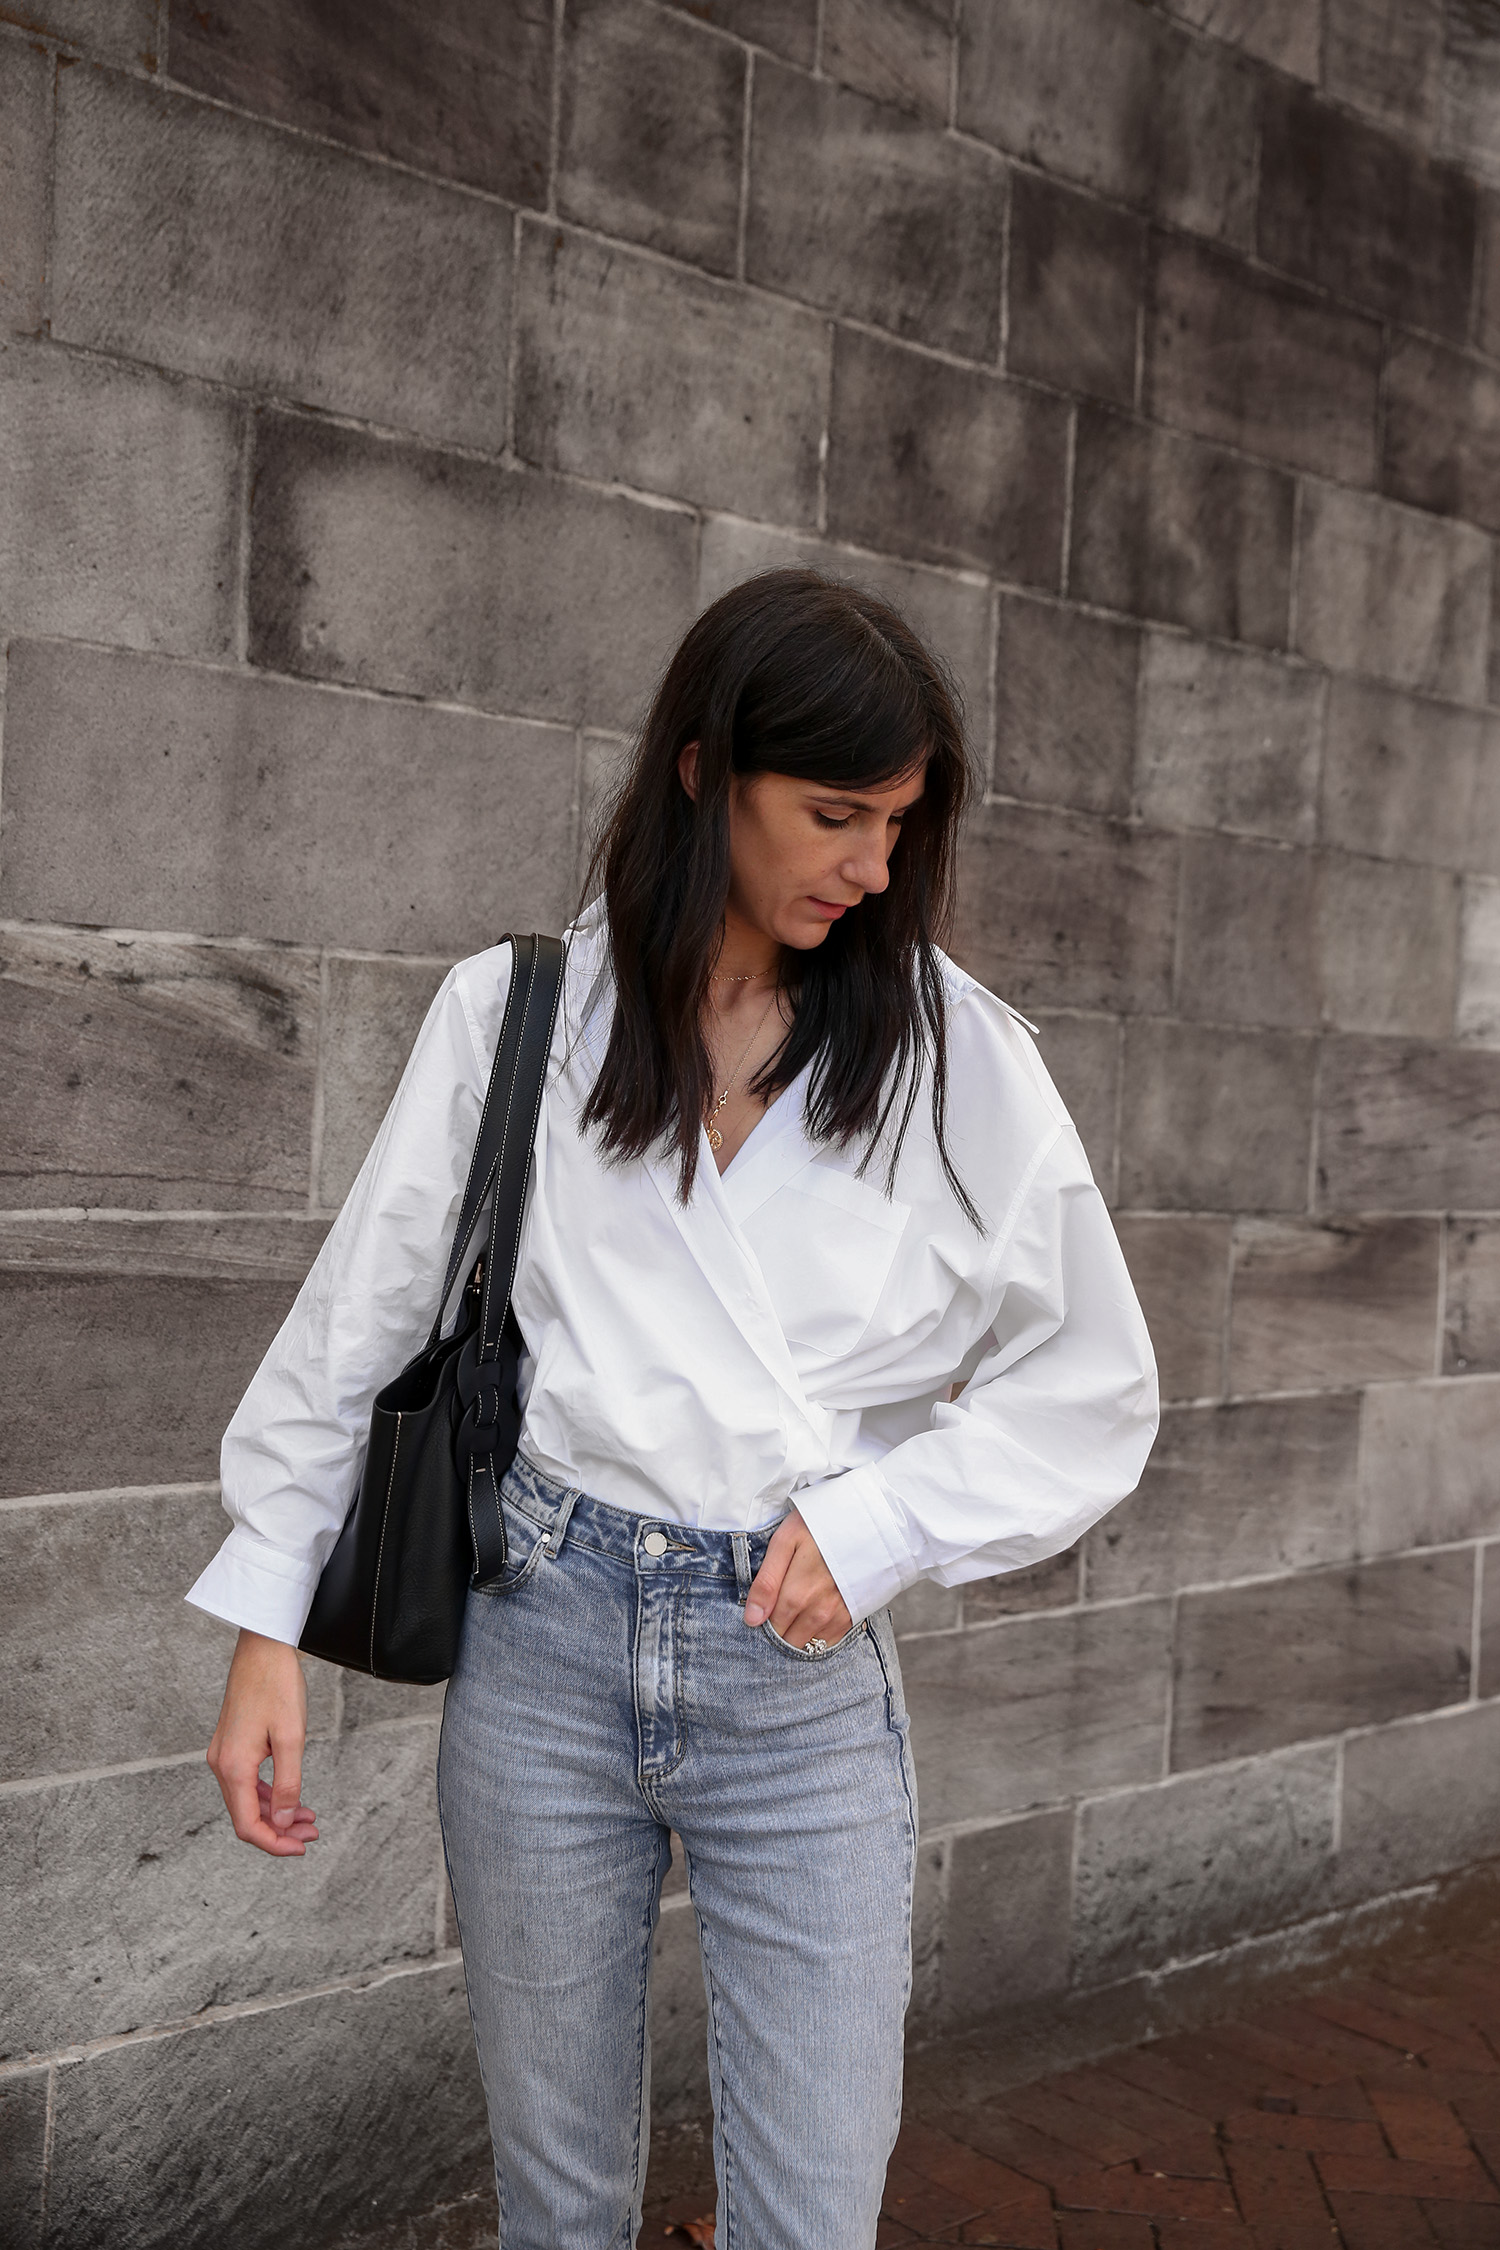 What type of white shirt looks good with blue jeans? - Quora